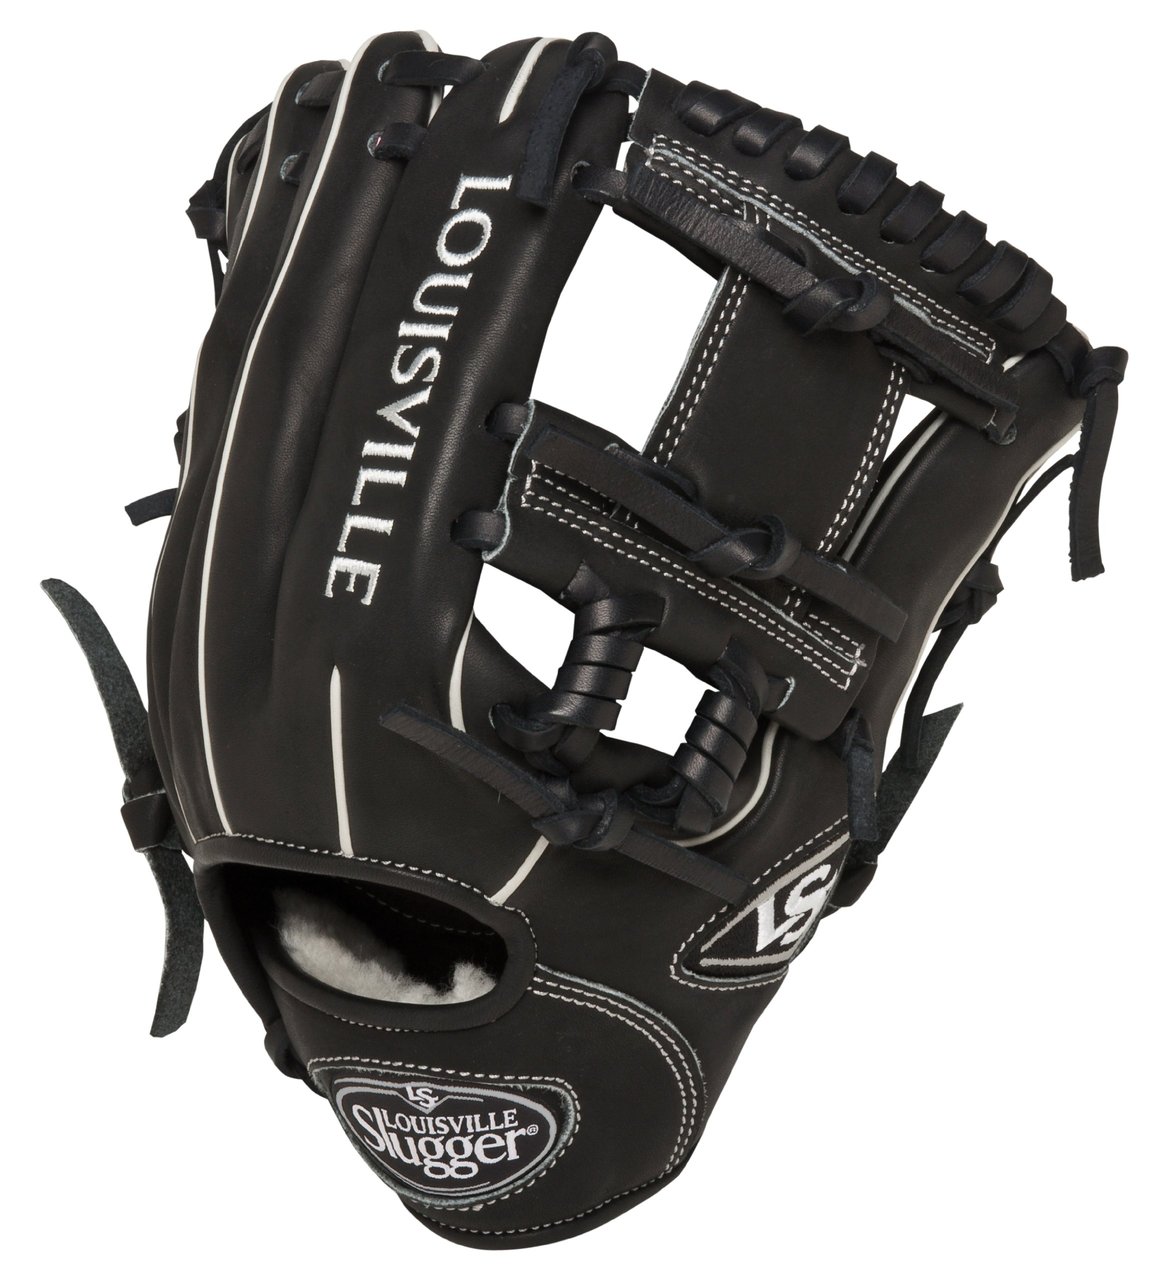 Louisville Slugger Pro Flare 11.25 inch Baseball Glove (Right Handed Throw) : Louisville Slugger Pro Flare gloves are designed to keep pace with the evolution of Baseball. The unique Flare design allows for quick-transfer of ball from glove to hand, because every split second counts. Better technology, better materials and better design. There is a larger catching surface area made possible by the extra wide lacing and curved finger tips. The gloves are made from professional-grade, oil-infused leather for maximum feel and performance right off the shelf.